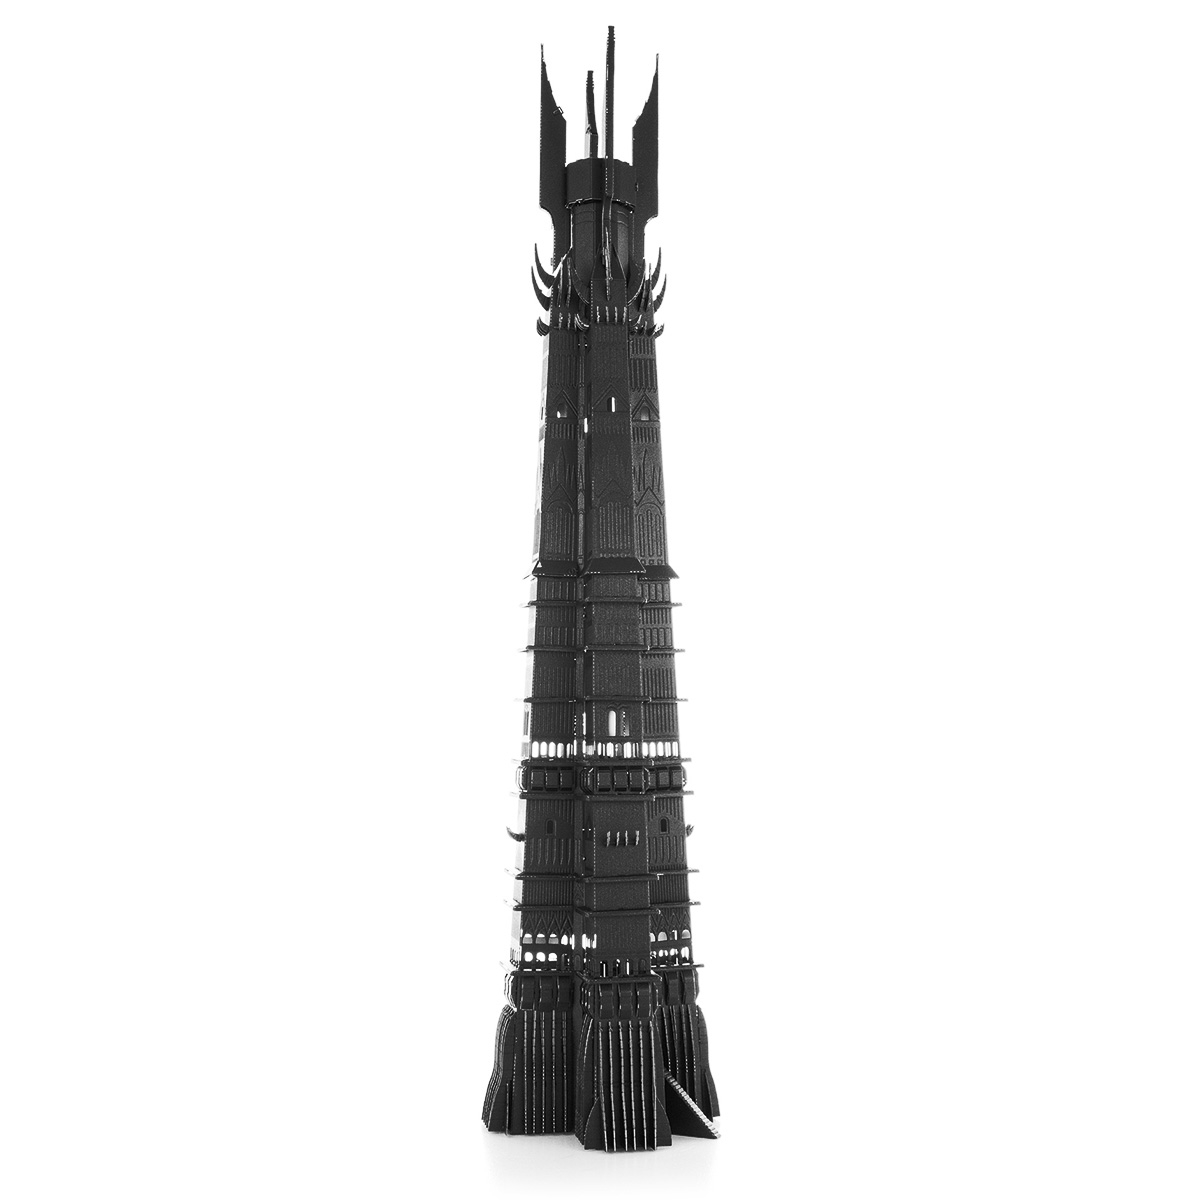 Orthanc Metal Earth Lord of the Rings Premium Series